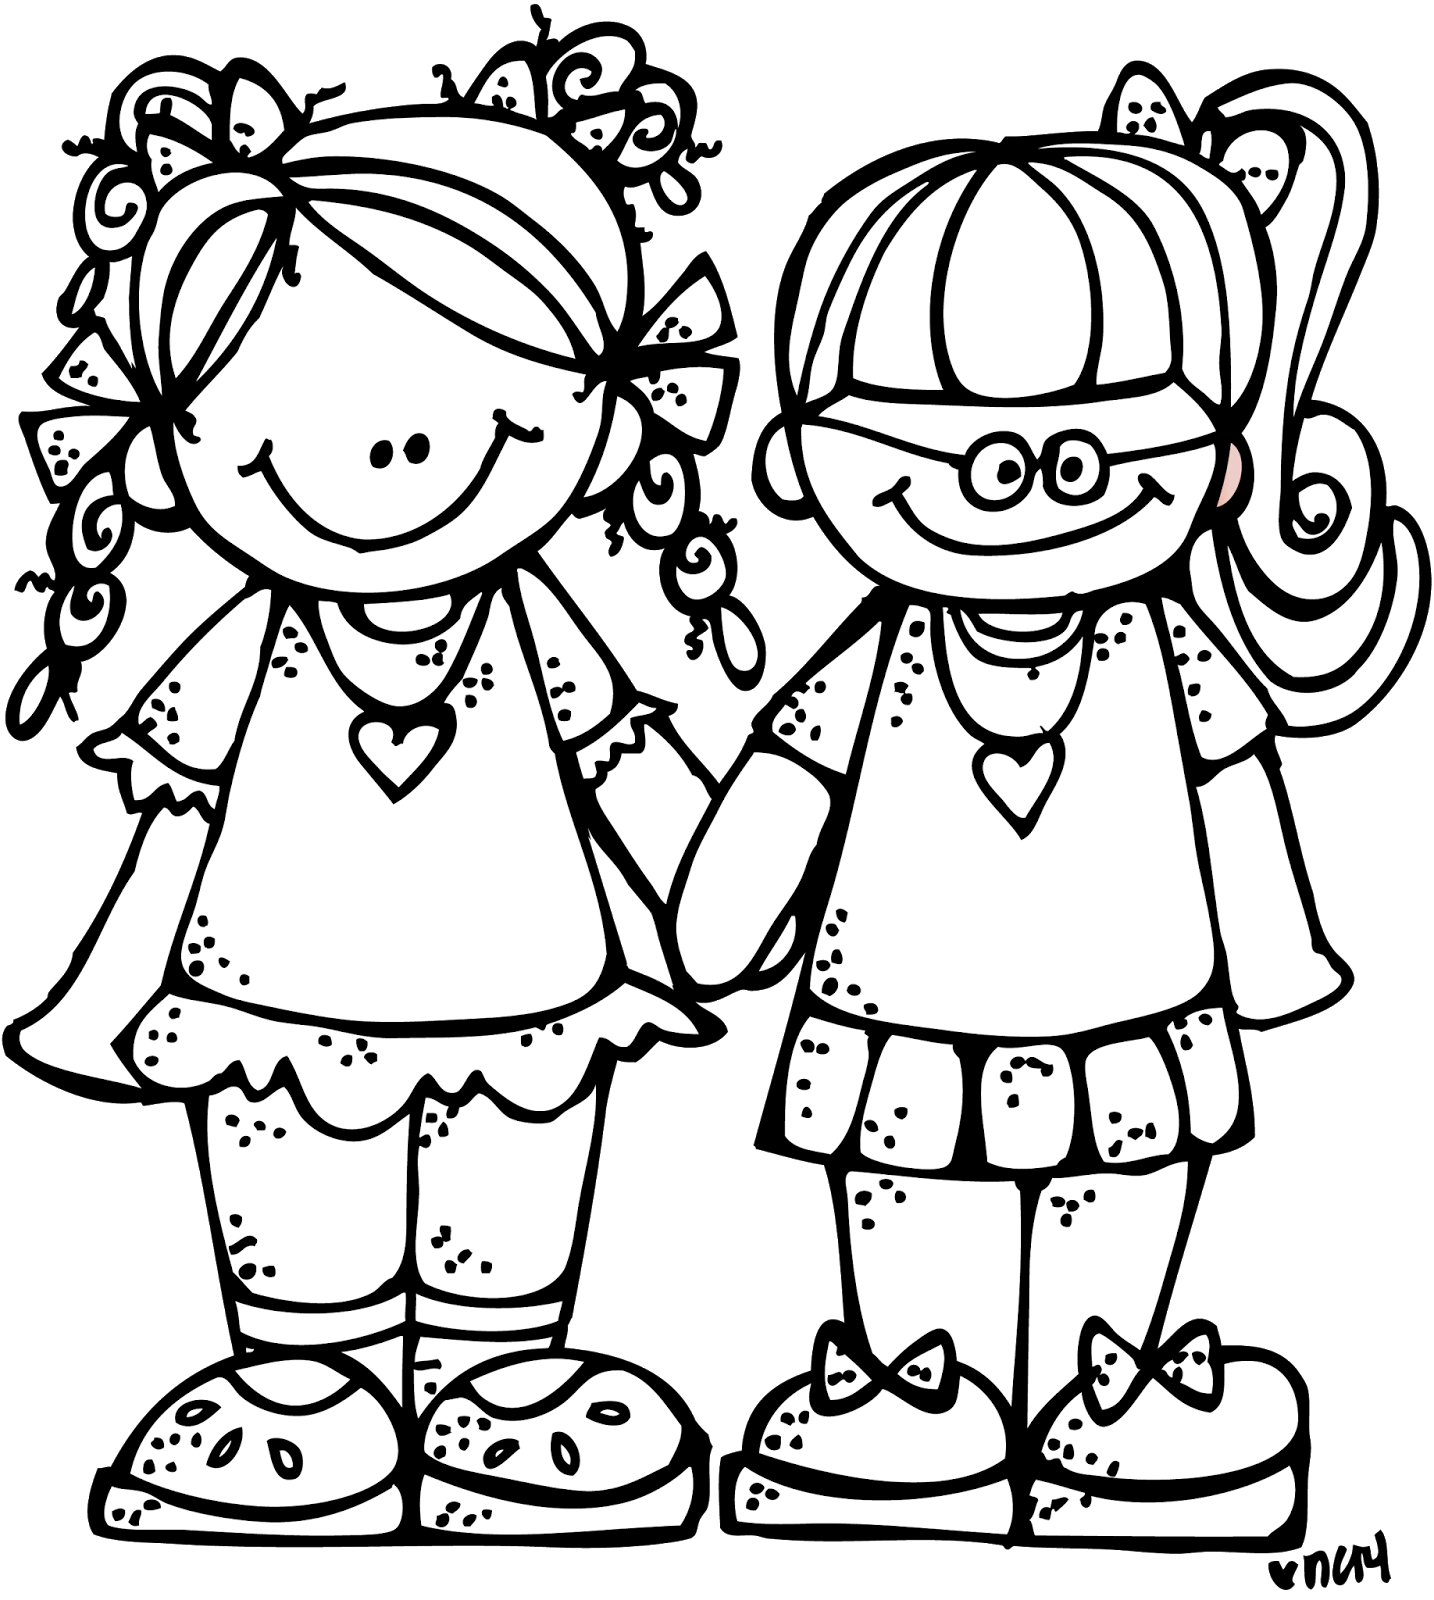 Melonheadz black and white clipart school clothes 